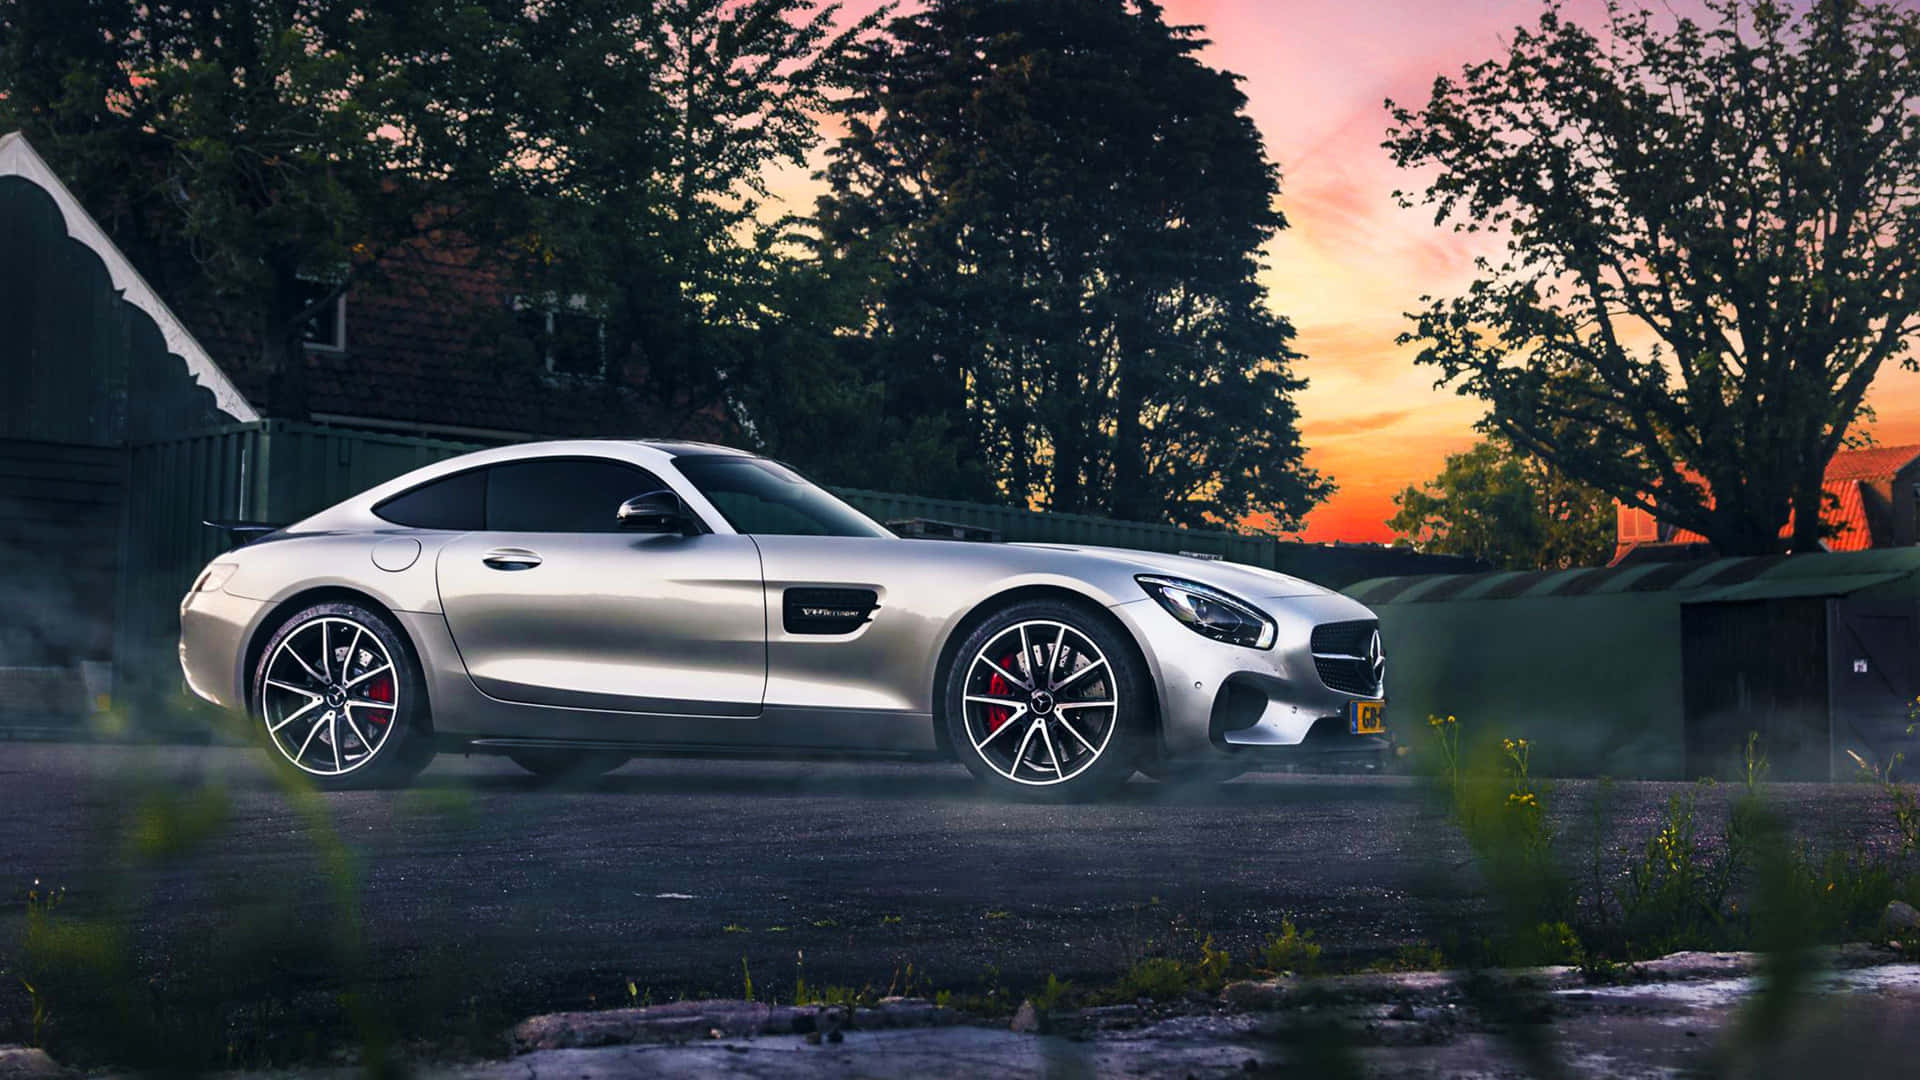 "A Powerful Blend Of Performance, Luxury and Style: The Mercedes AMG GT" Wallpaper